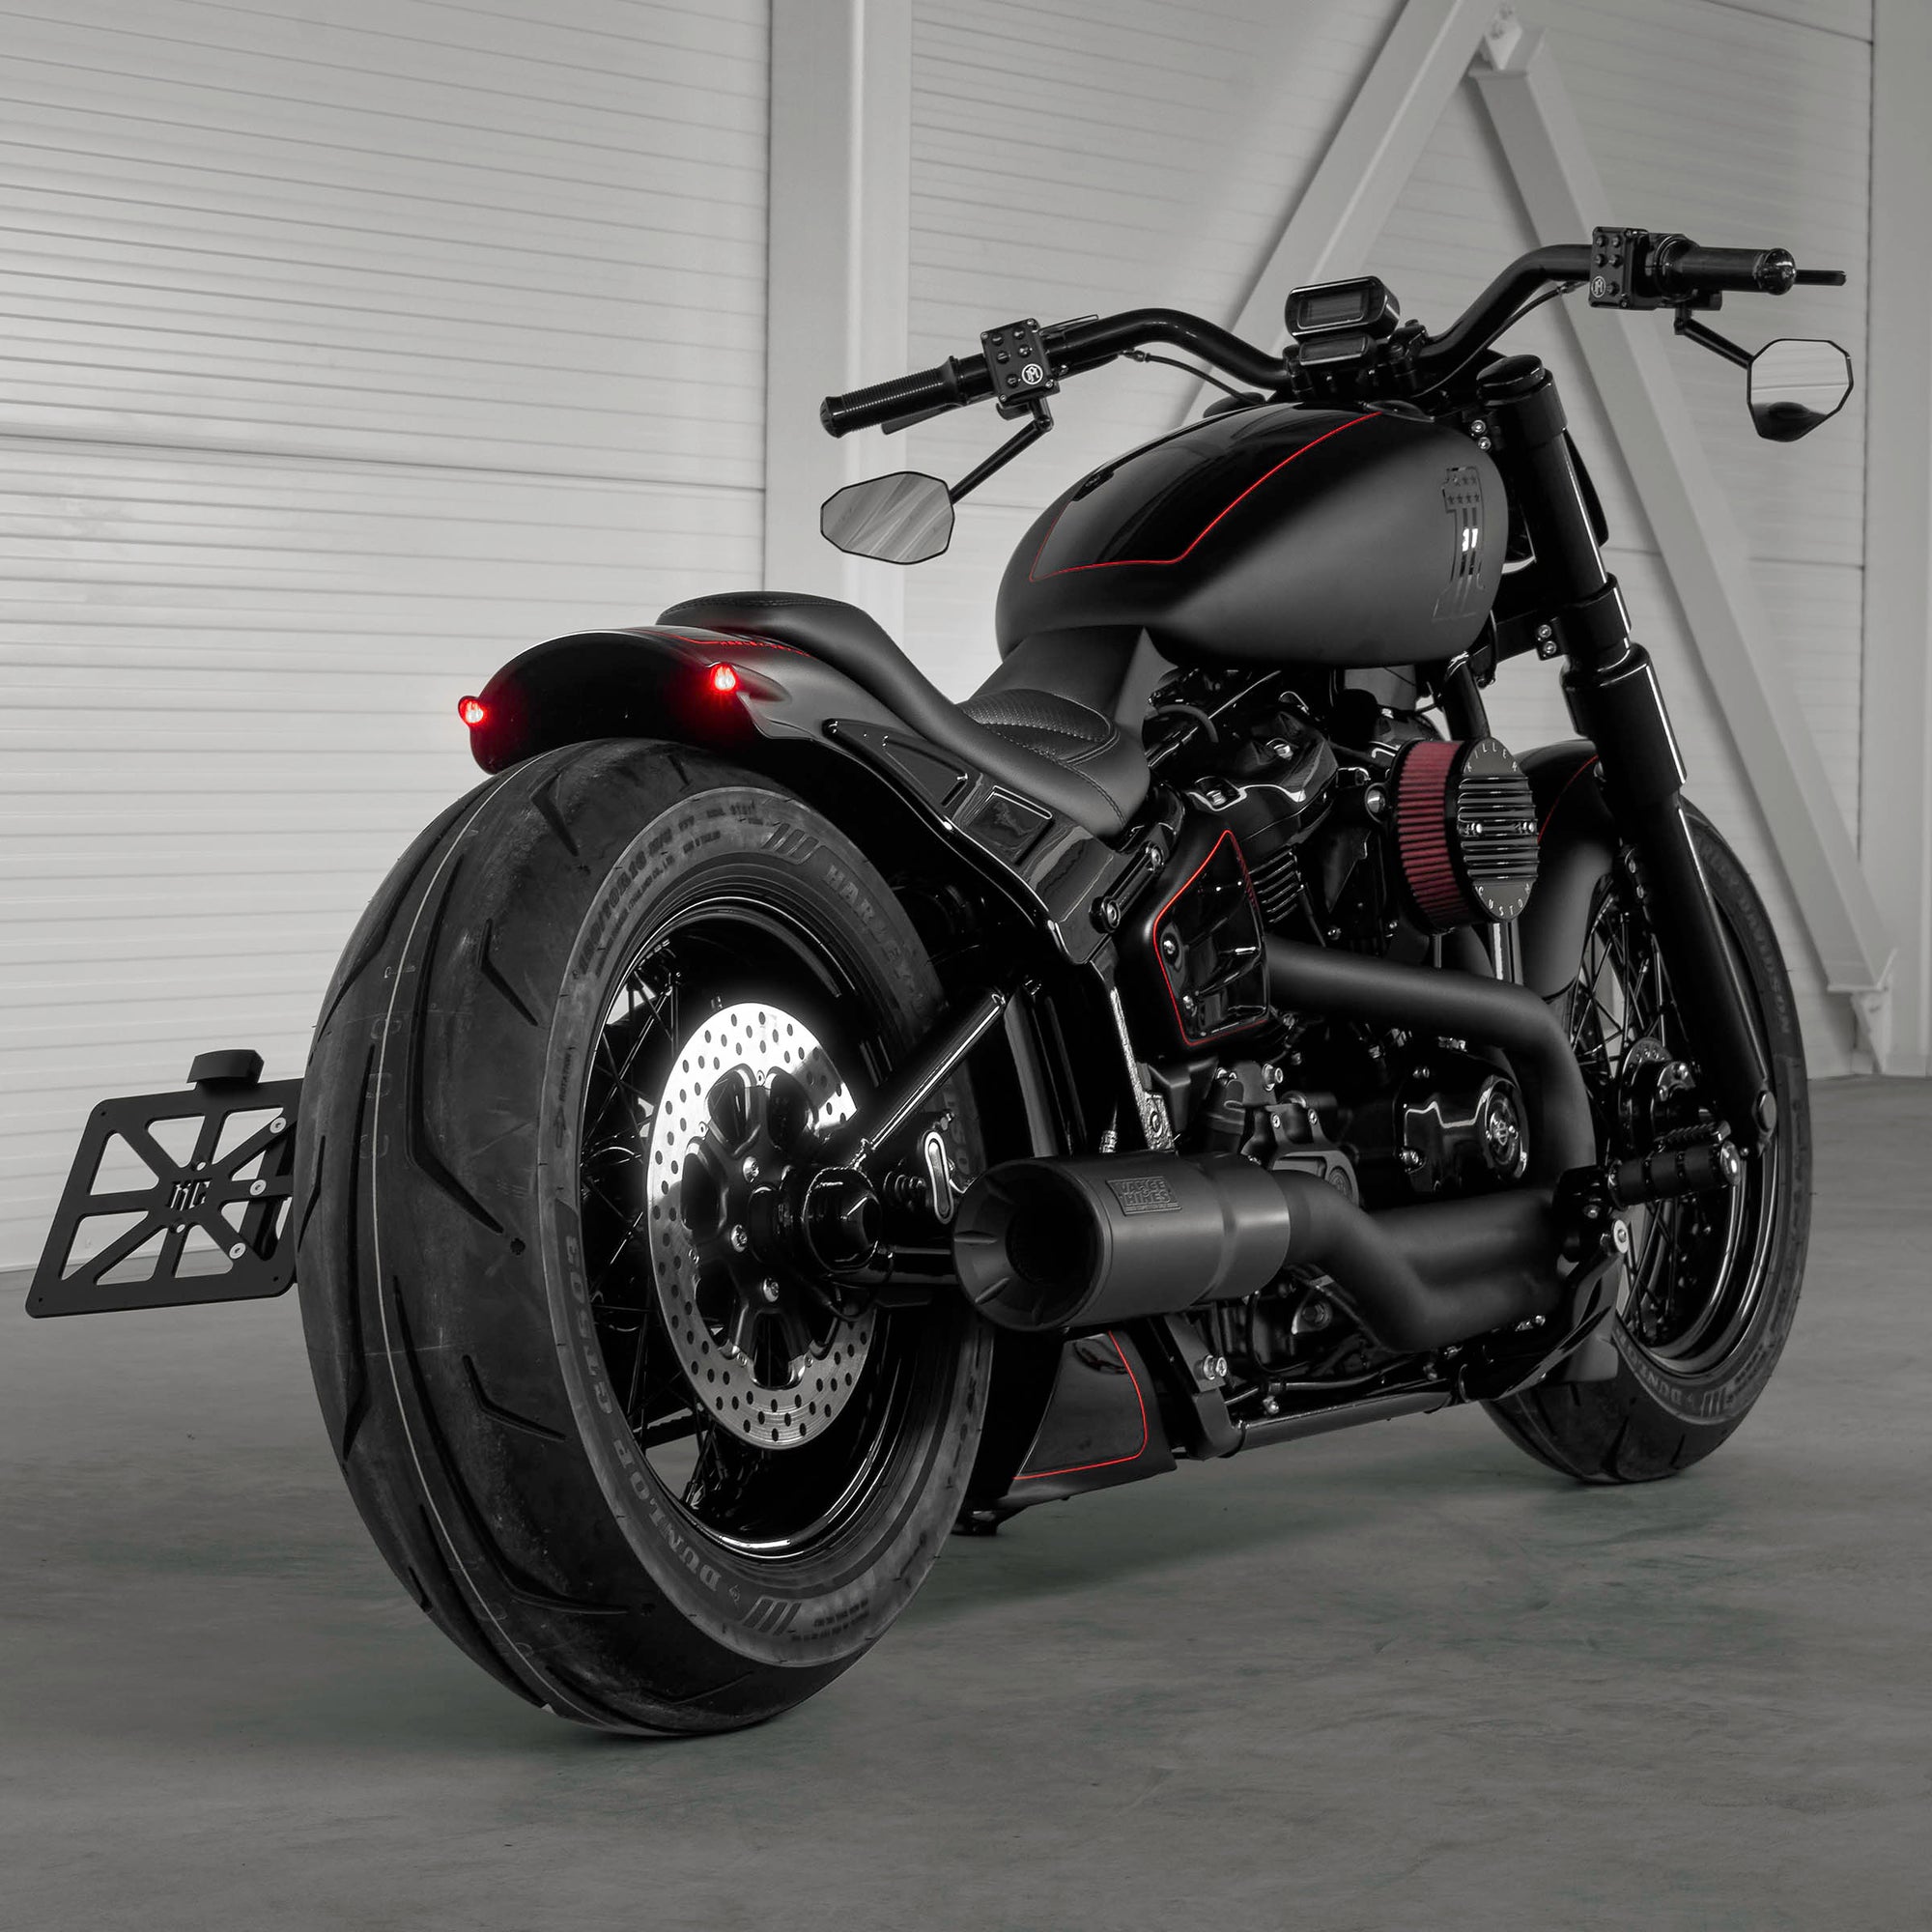 Harley Davidson motorcycle with Killer Custom parts from the rear in a modern white garage